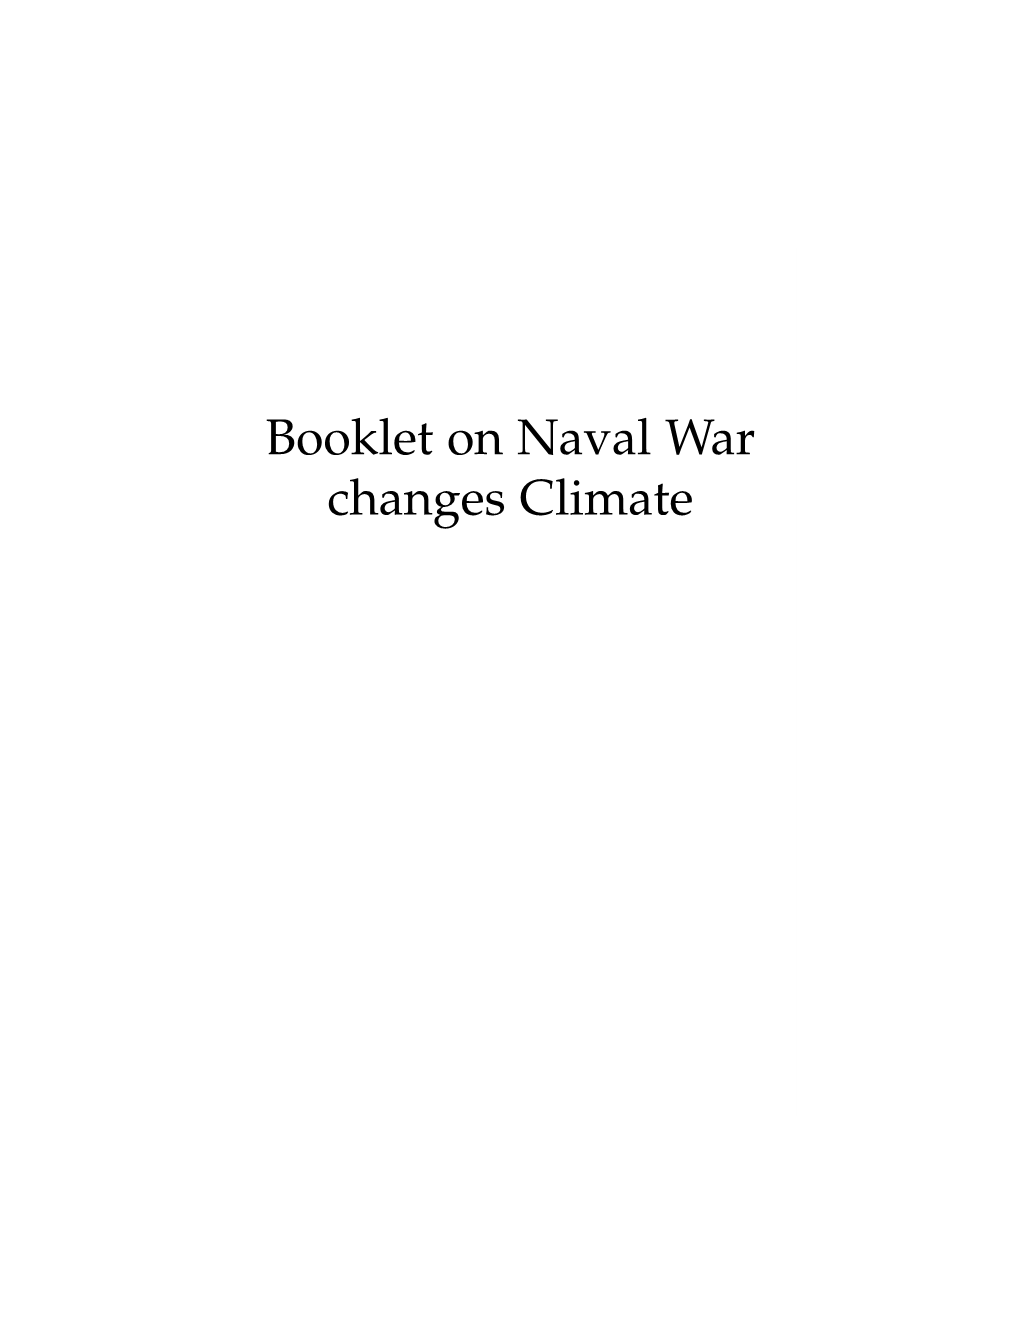 Booklet on Naval War Changes Climate